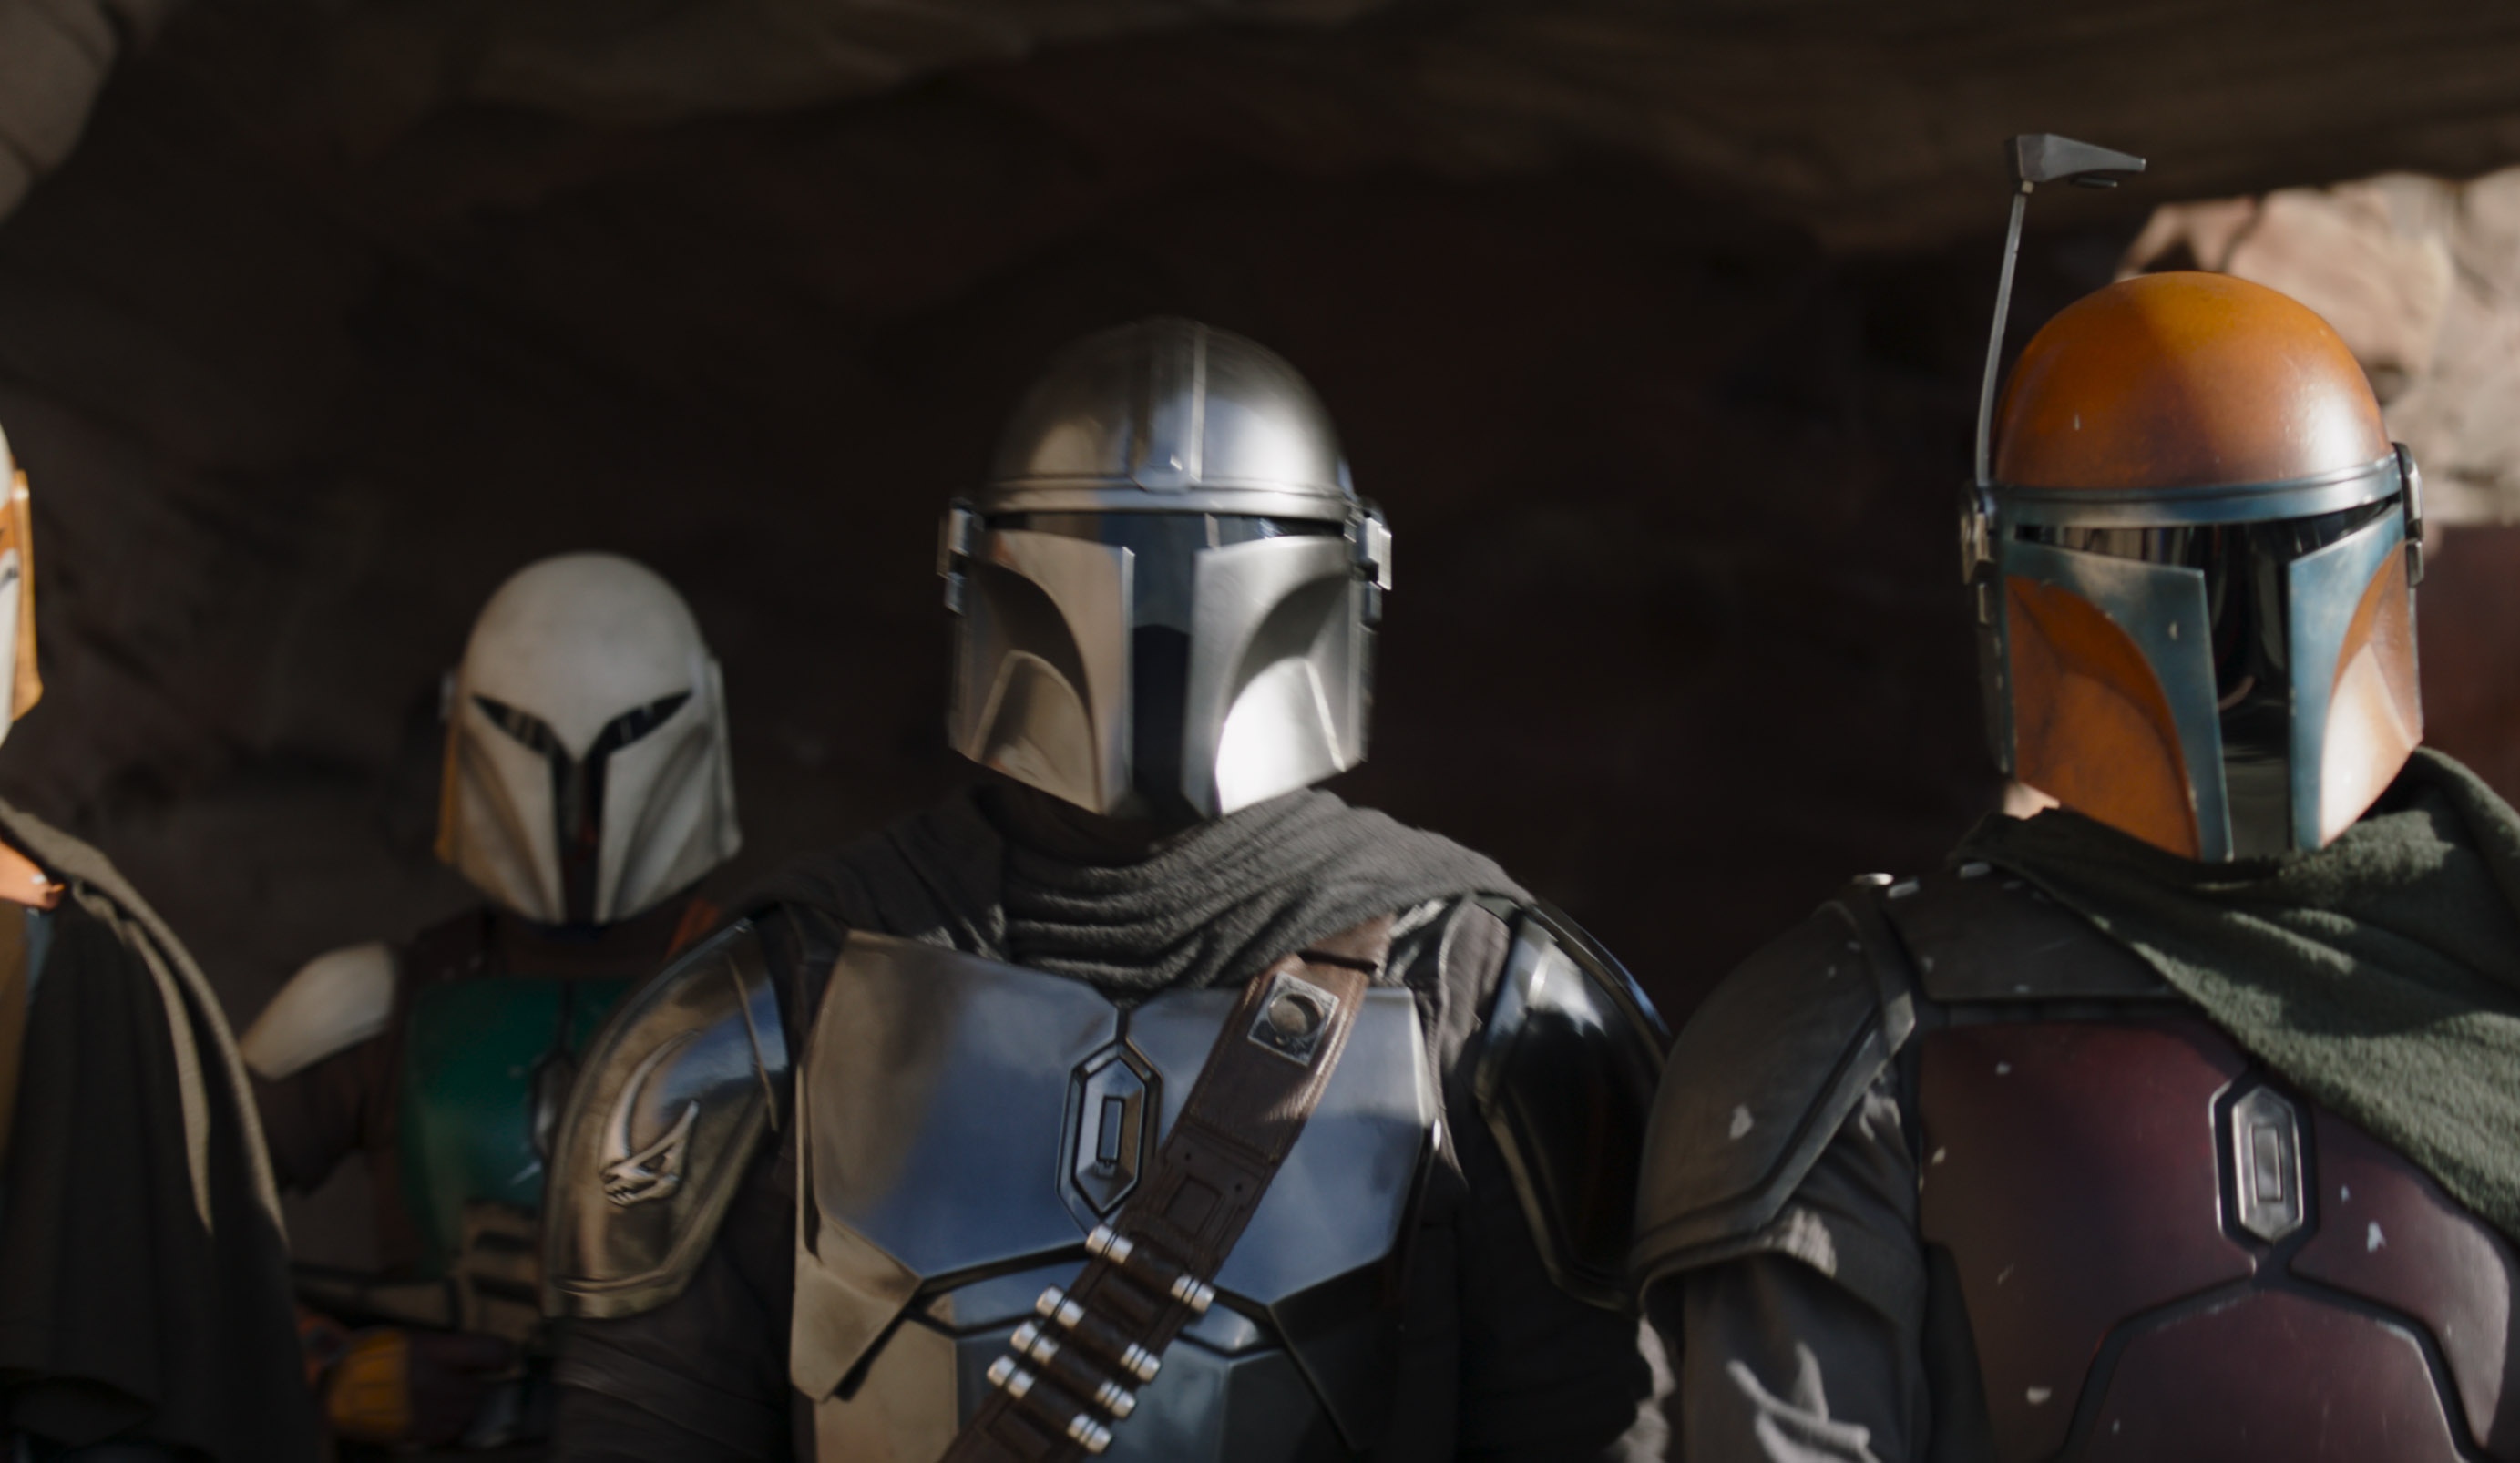 What to Expect From Season Three of 'The Mandalorian